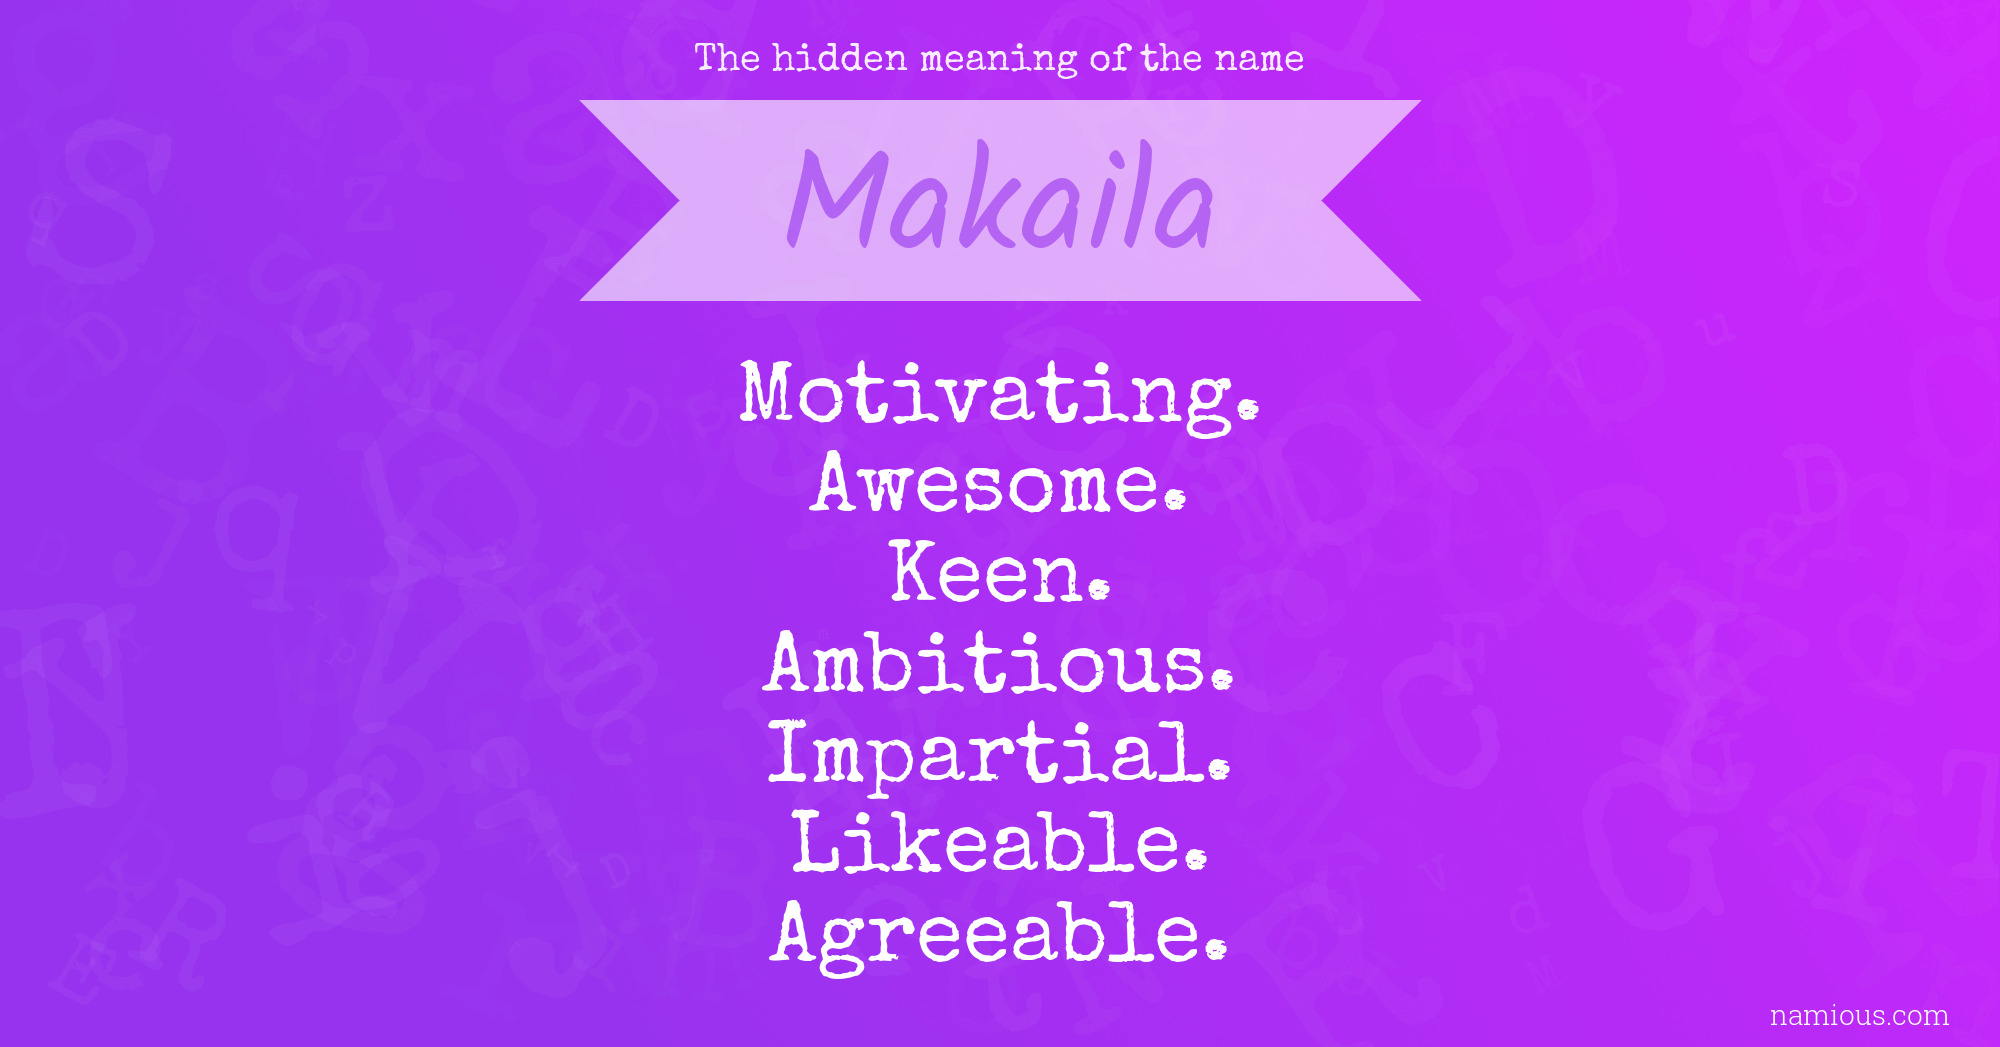 The hidden meaning of the name Makaila